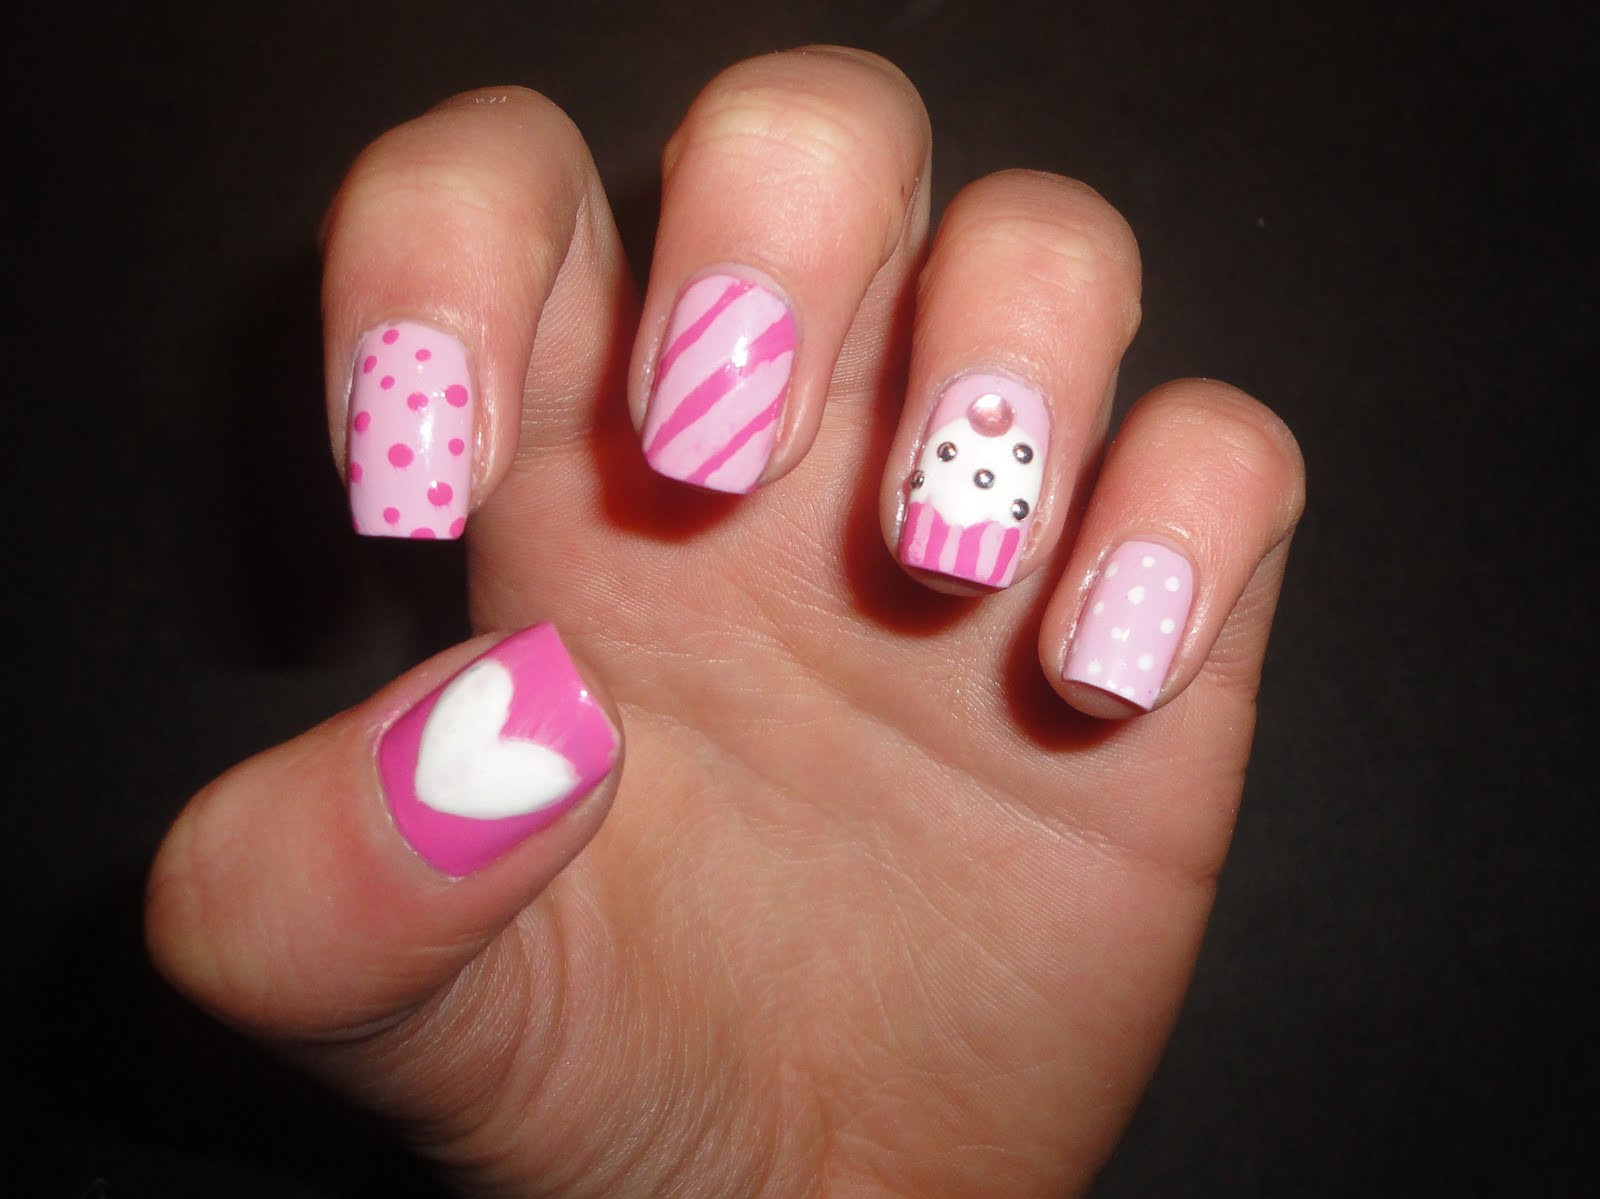 Pretty Nails Images
 Bow Ties and Barrettes HOT NAIL DESIGNS